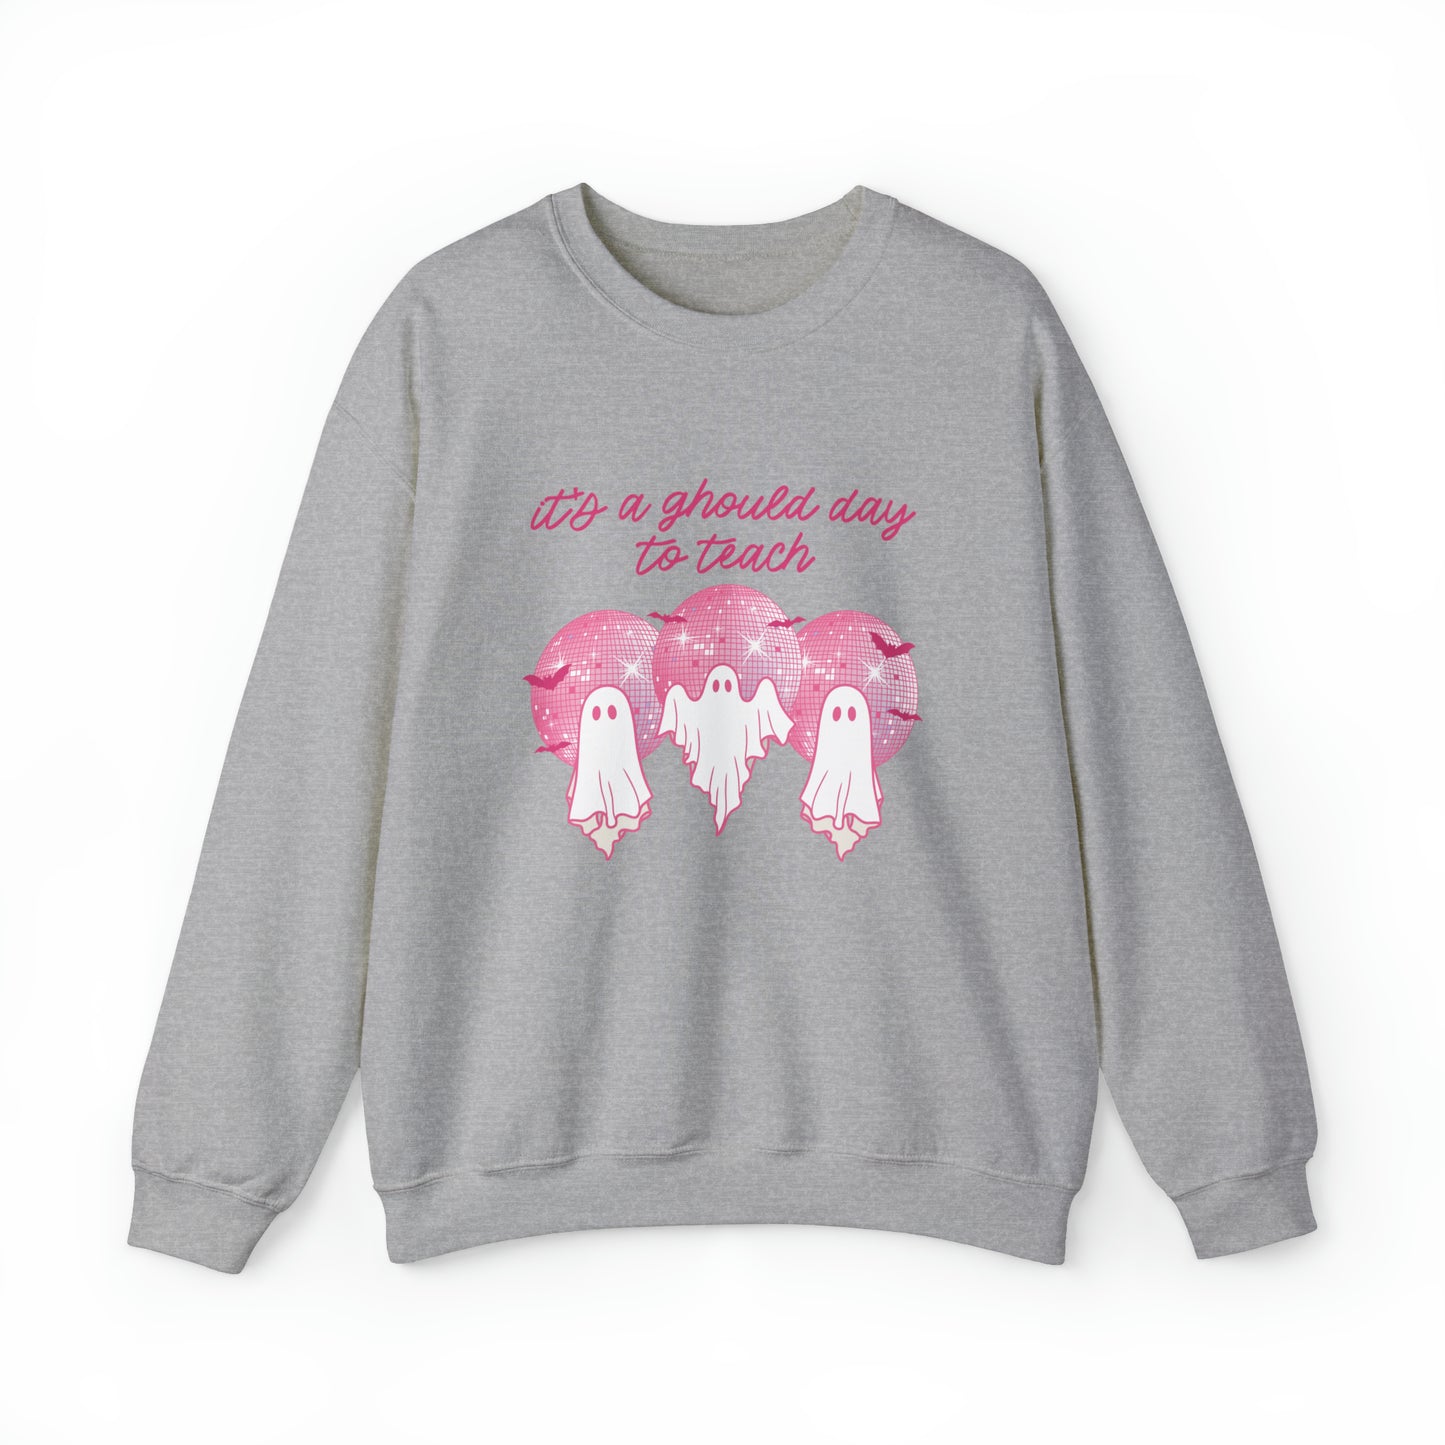 It's a Ghould Day to Teach Crewneck Sweatshirt